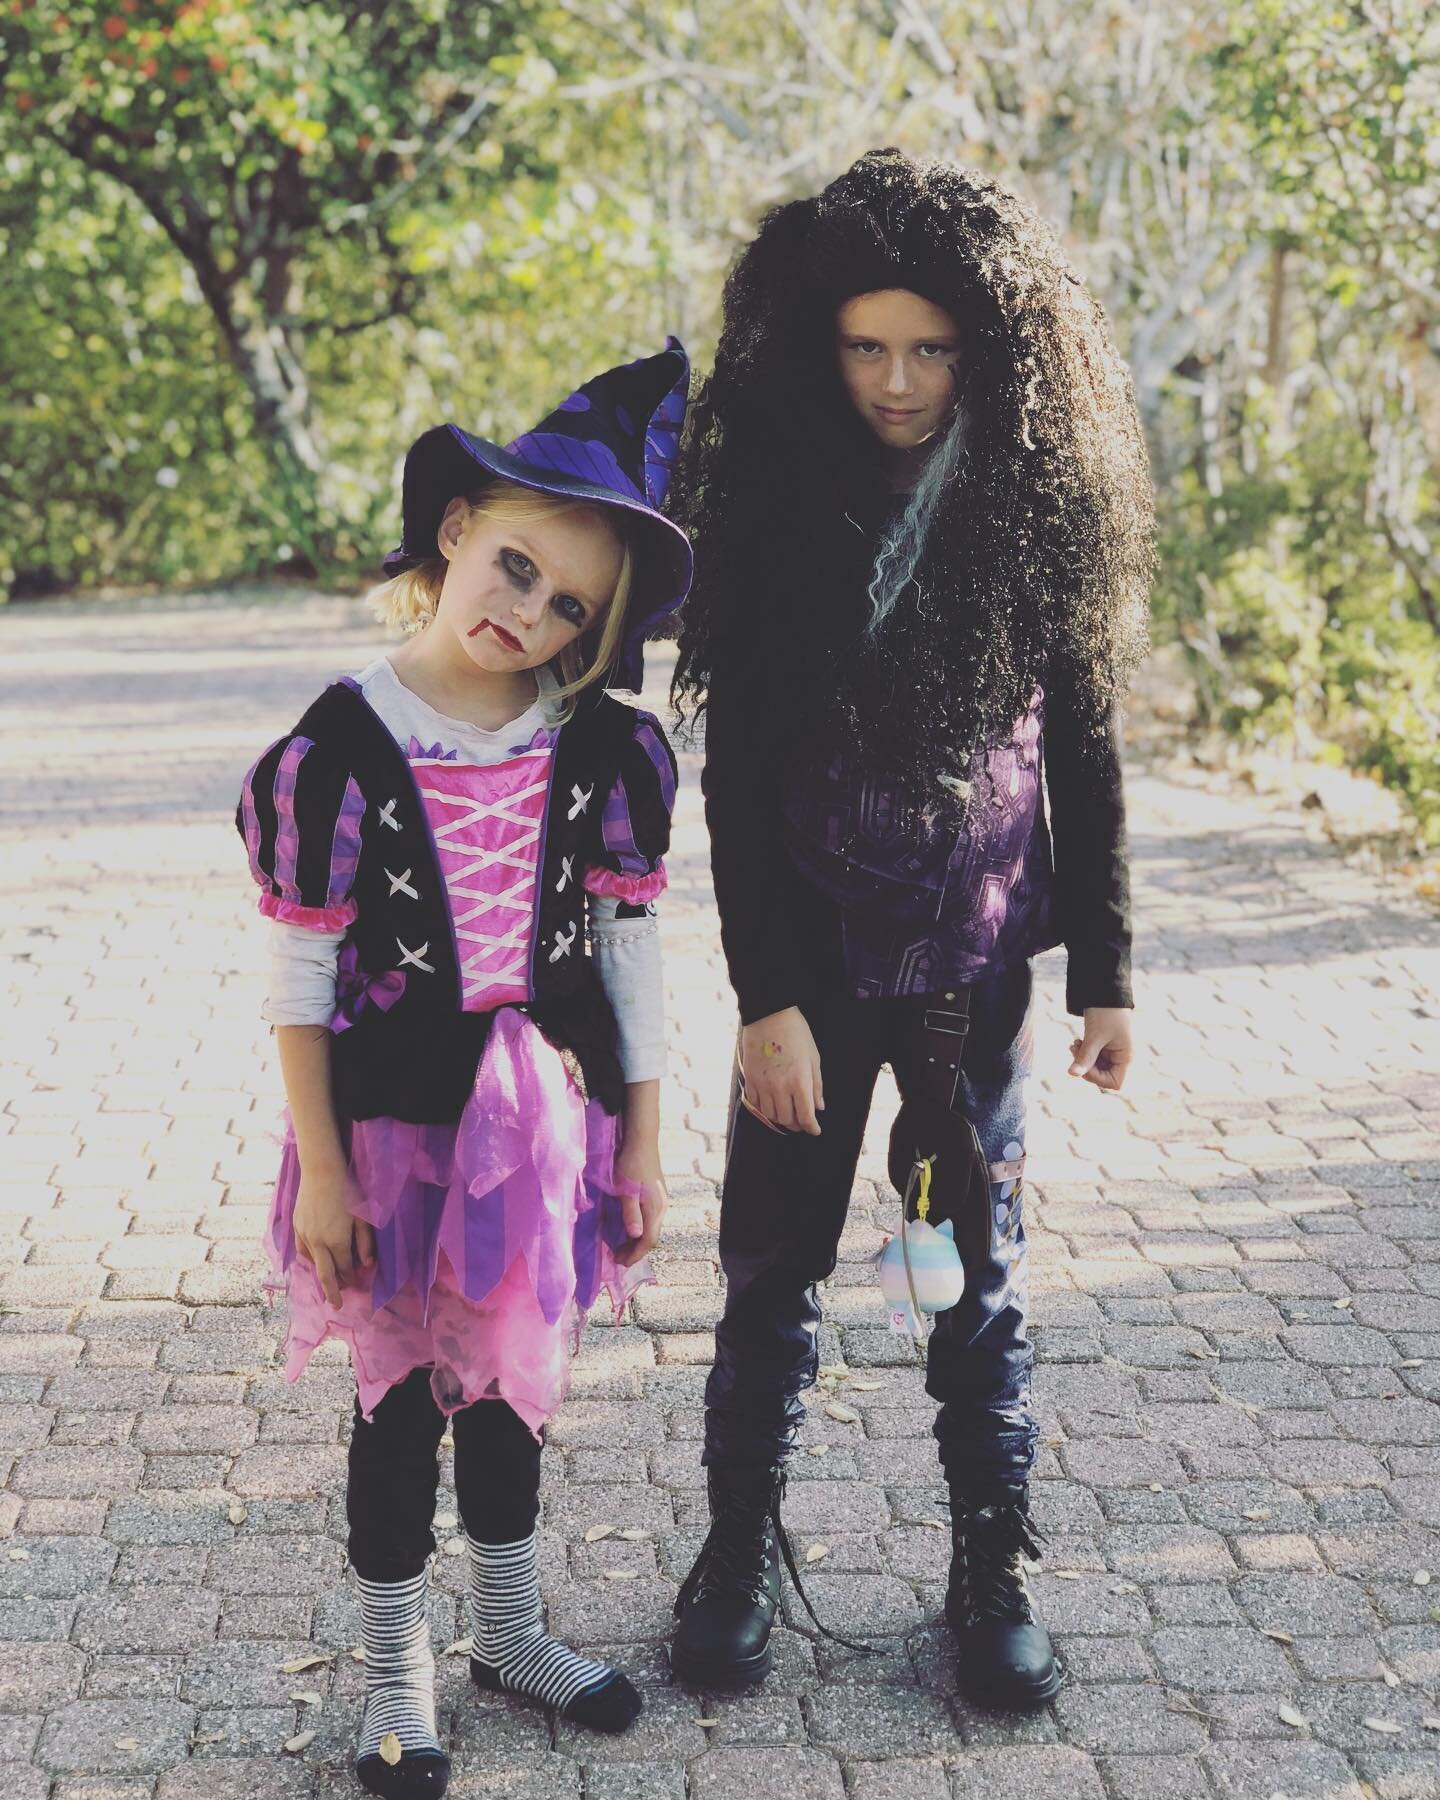 I find this mostly awesome and kind of terrifying, too. Especially the one on the left, who did her own makeup and knew to tilt her head and make her face like that. Kids are hilarious. Even extra when in costume. 
.
.
.
Happy Halloween! 🎃🎃🎃